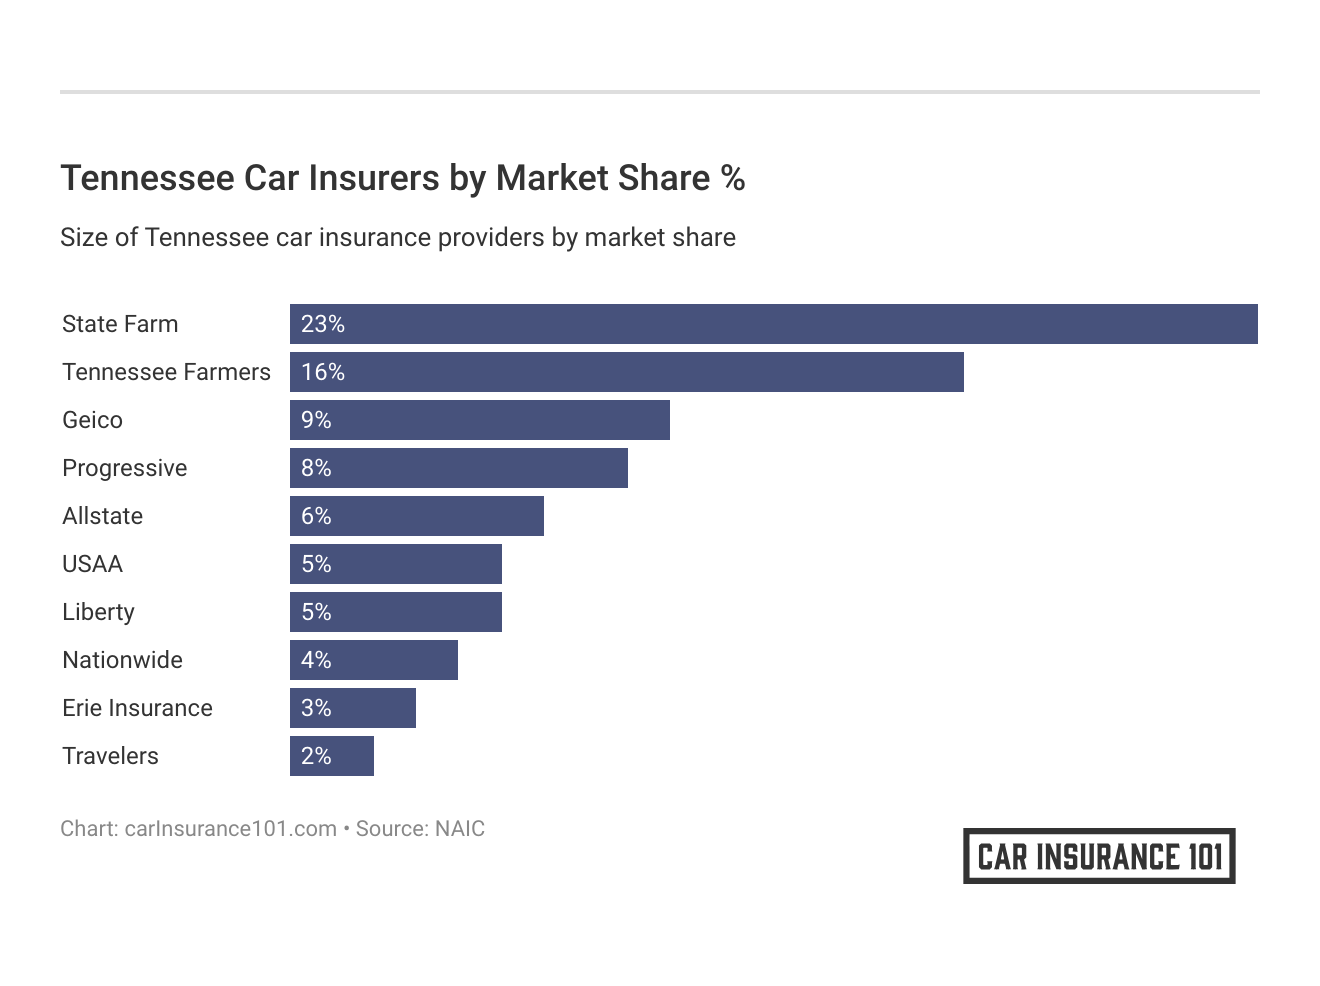 <h3>Tennessee Car Insurers by Market Share %</h3>